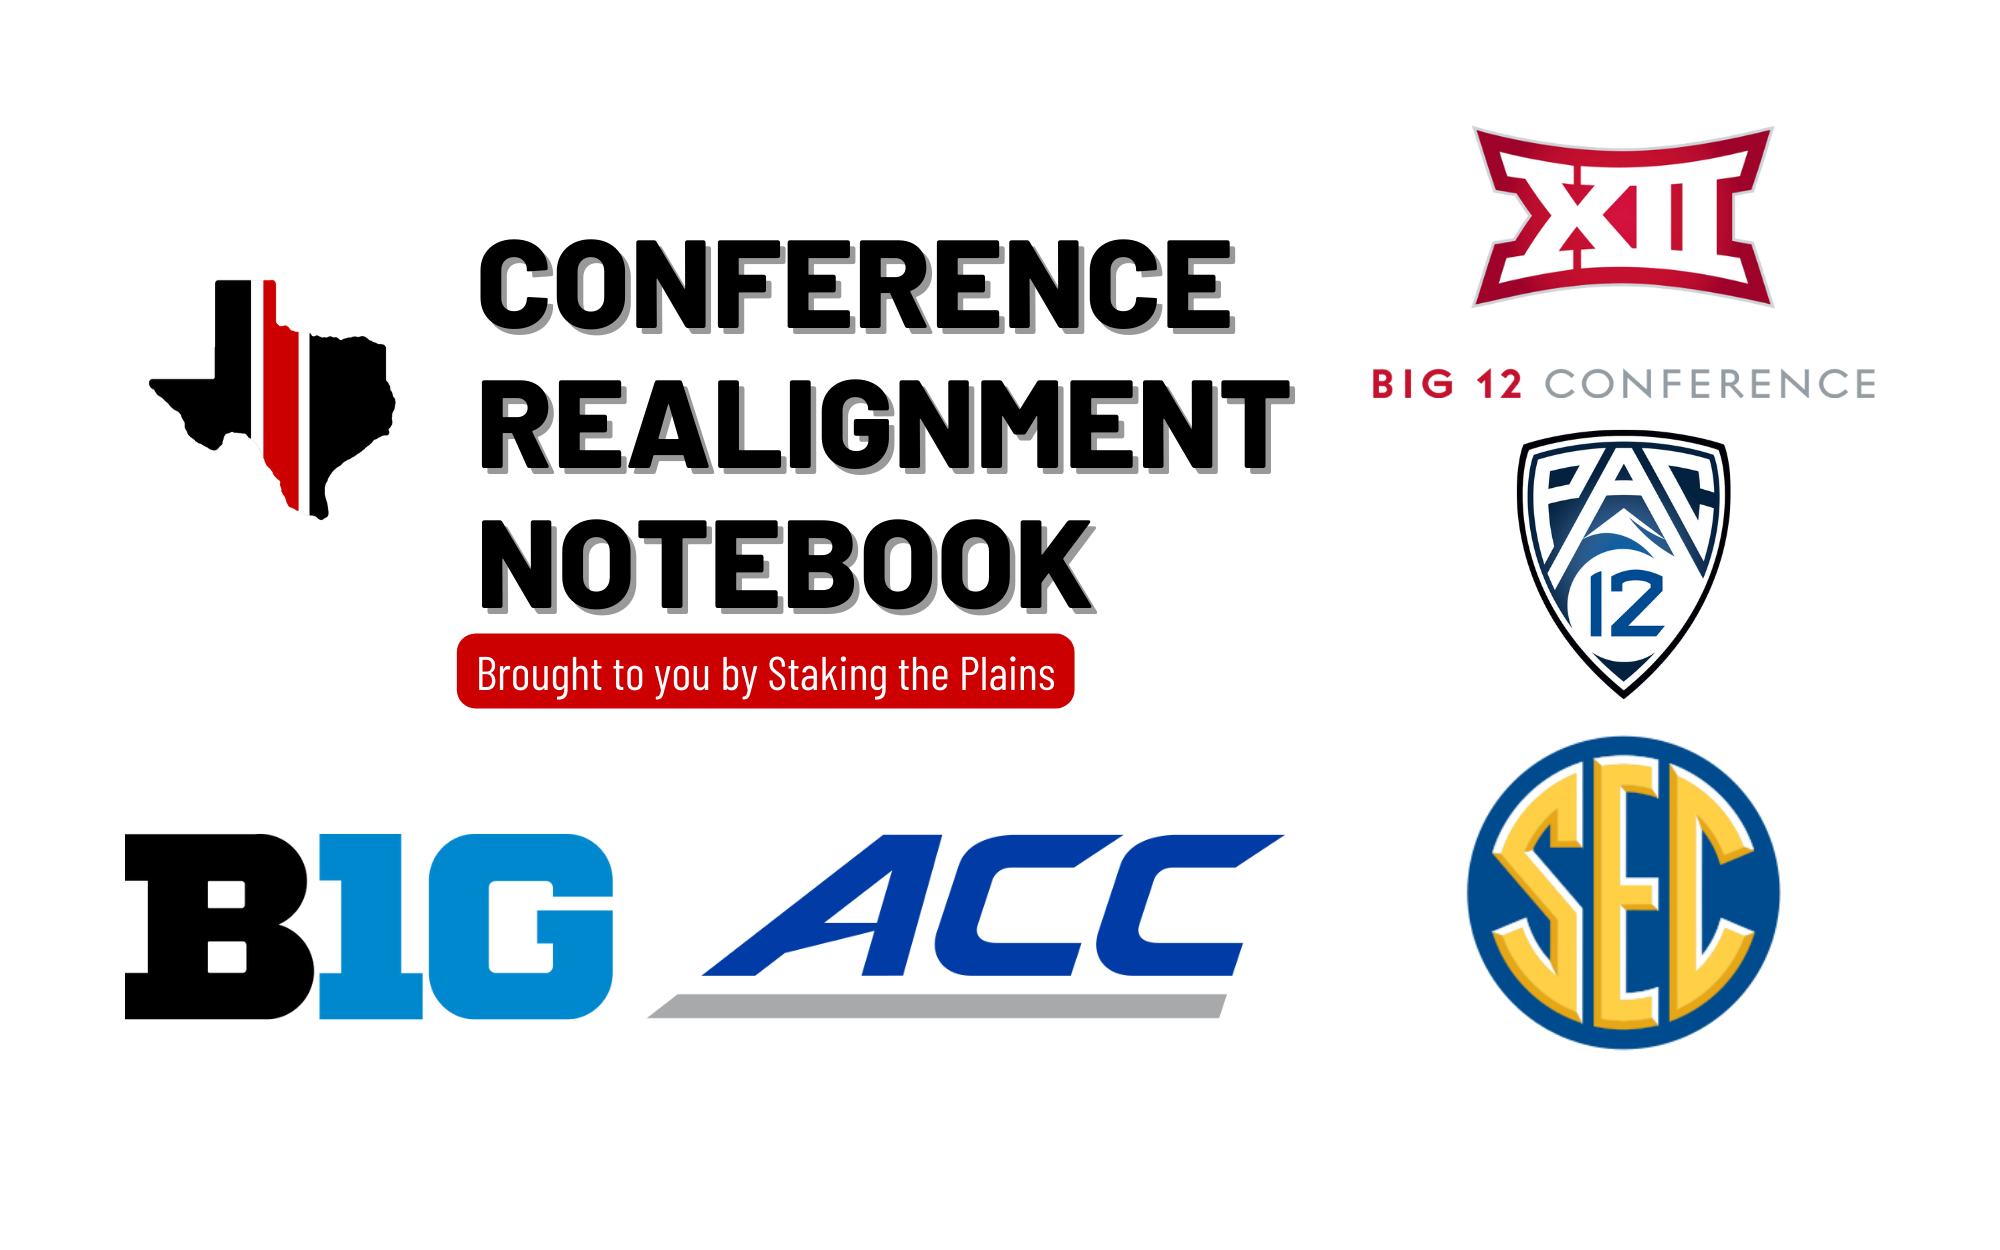 Conference Realignment Notebook: Report of Big 12 Meeting on Tuesday